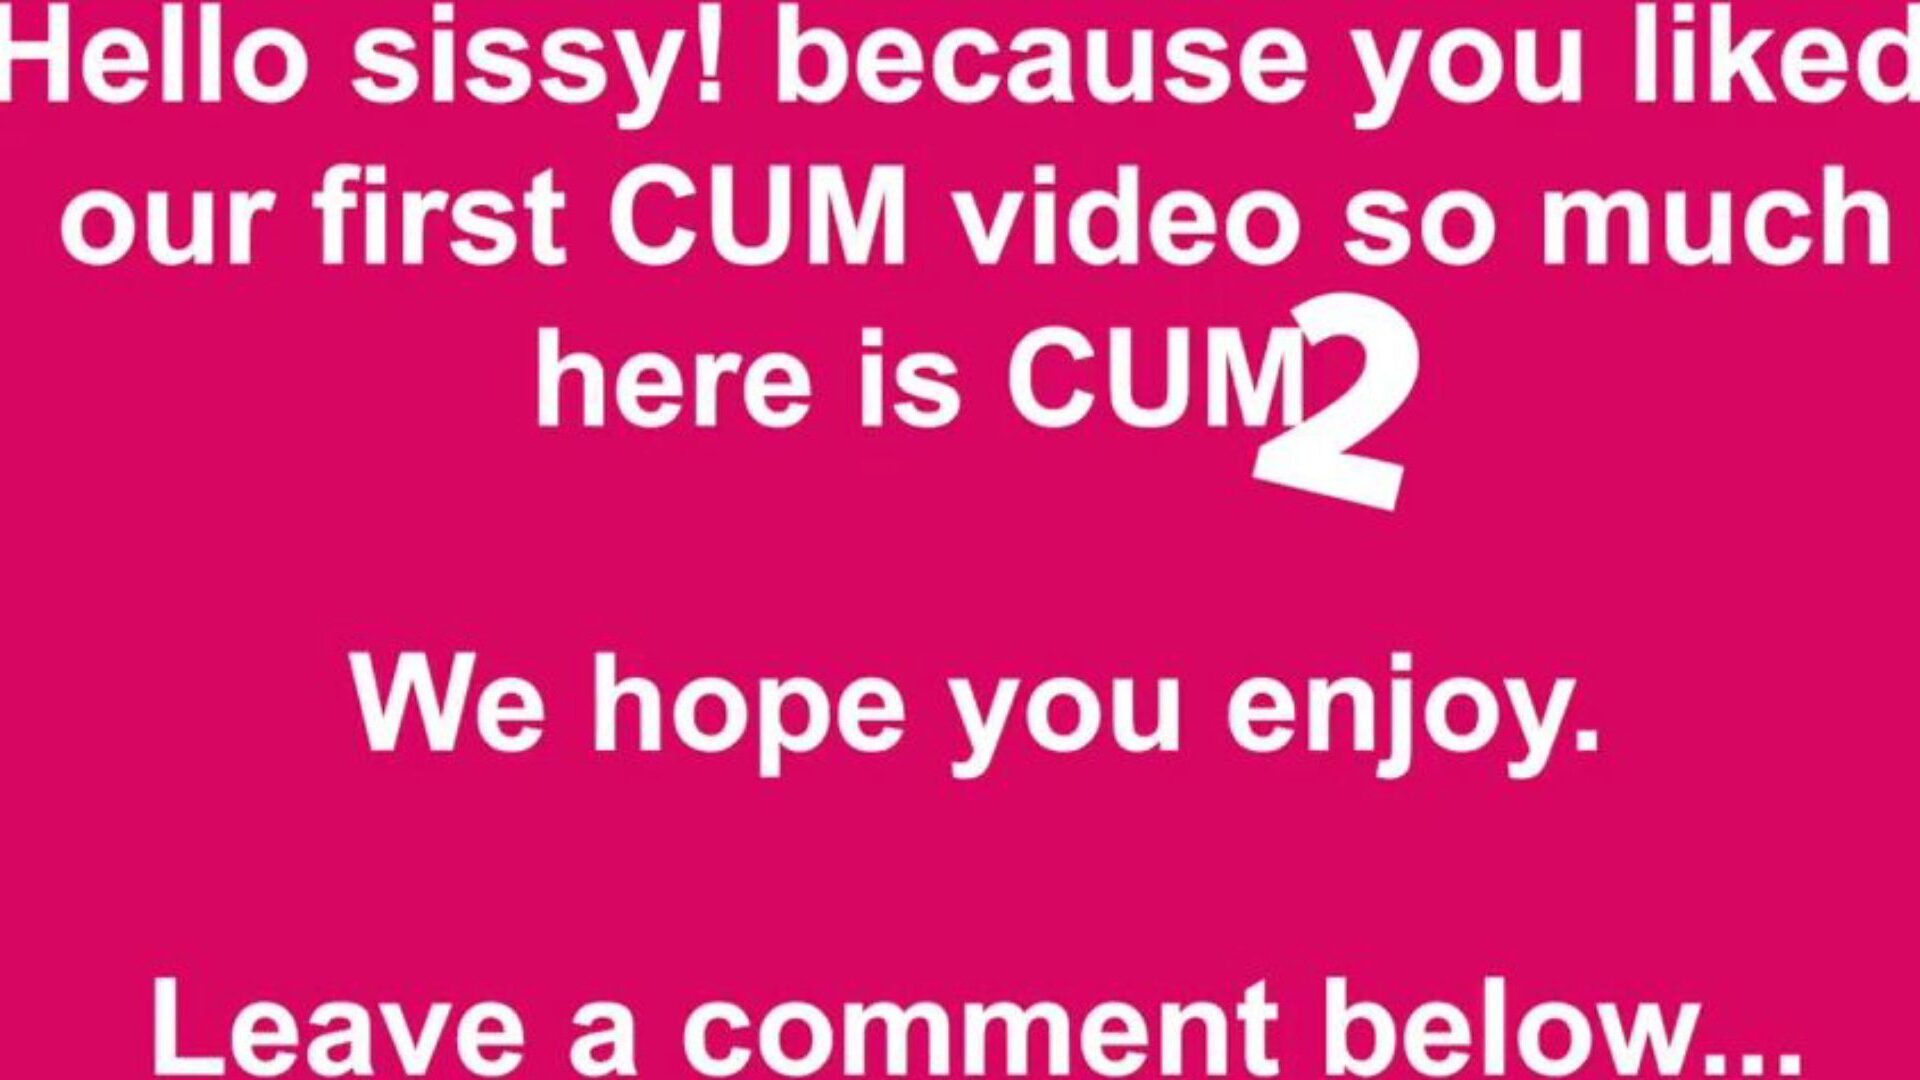 cum two free cum & cumming tube porn video 49 - xhamster watch cum two tube fuck-a-thon video free on xhamster, with the imperious collection of free cum cumming tube & tube 2 hd porno film epizody